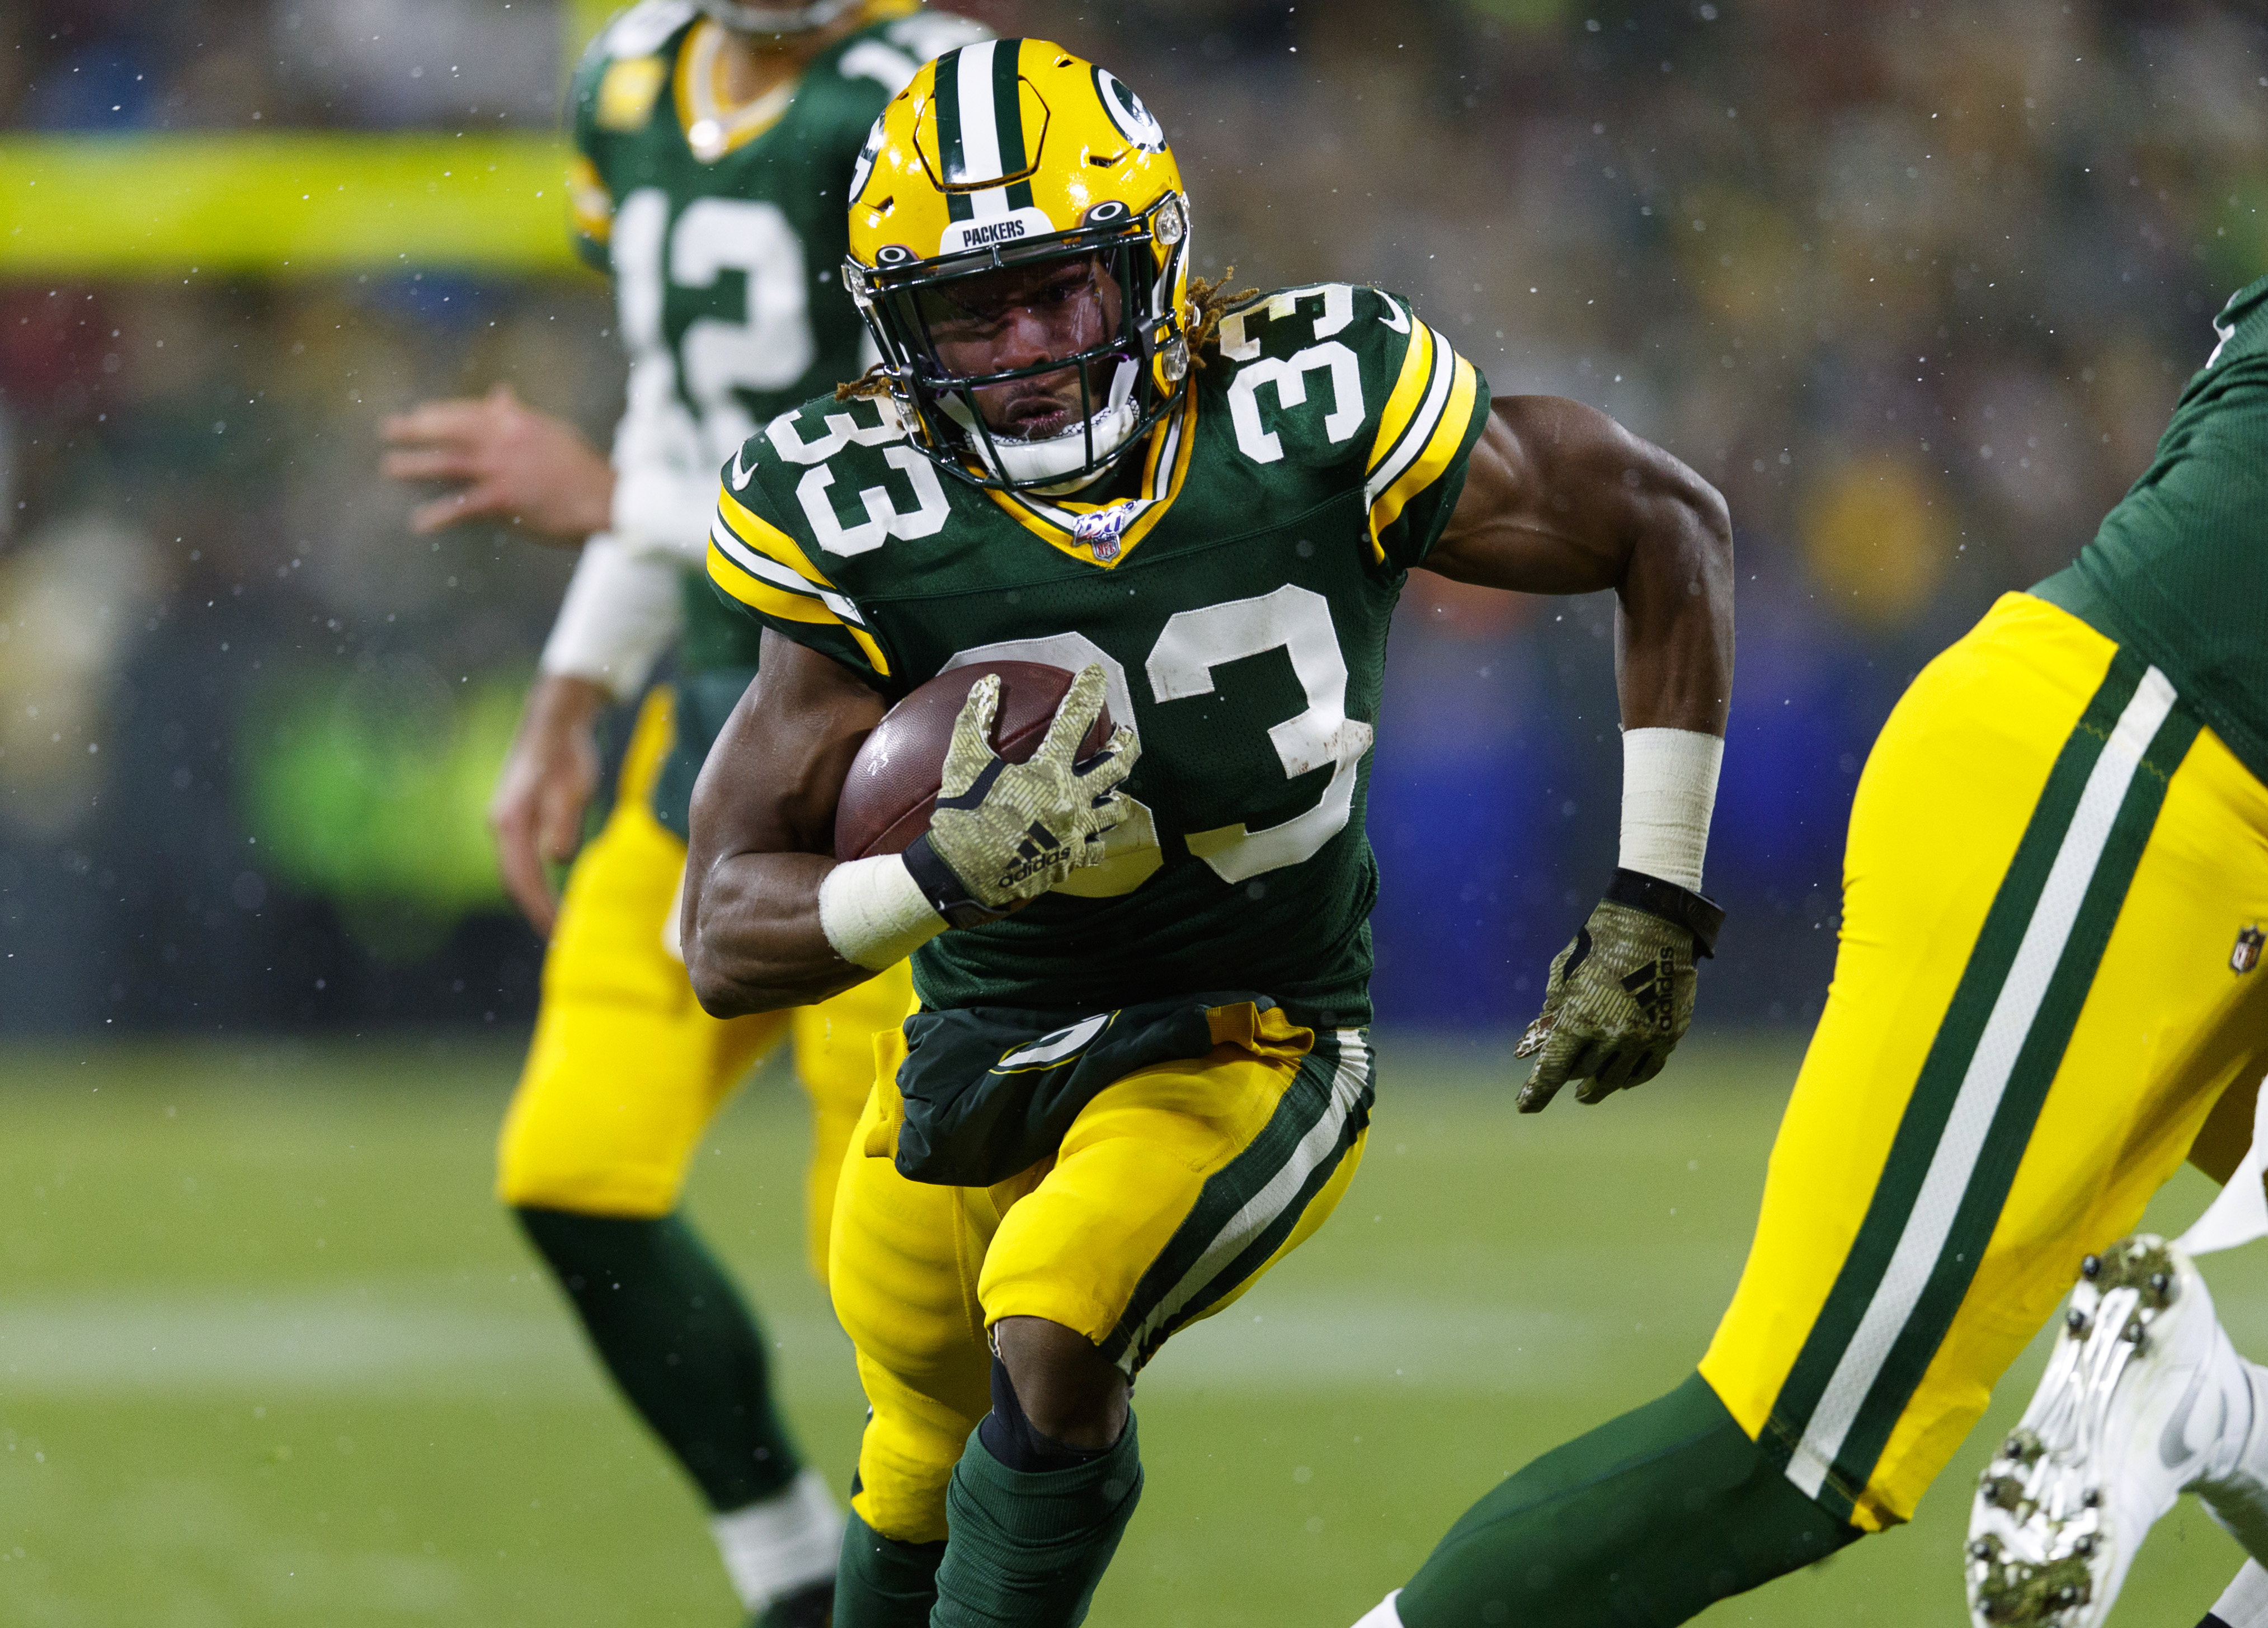 Packers fans could use fewer Davante Adams stats during Fox broadcast